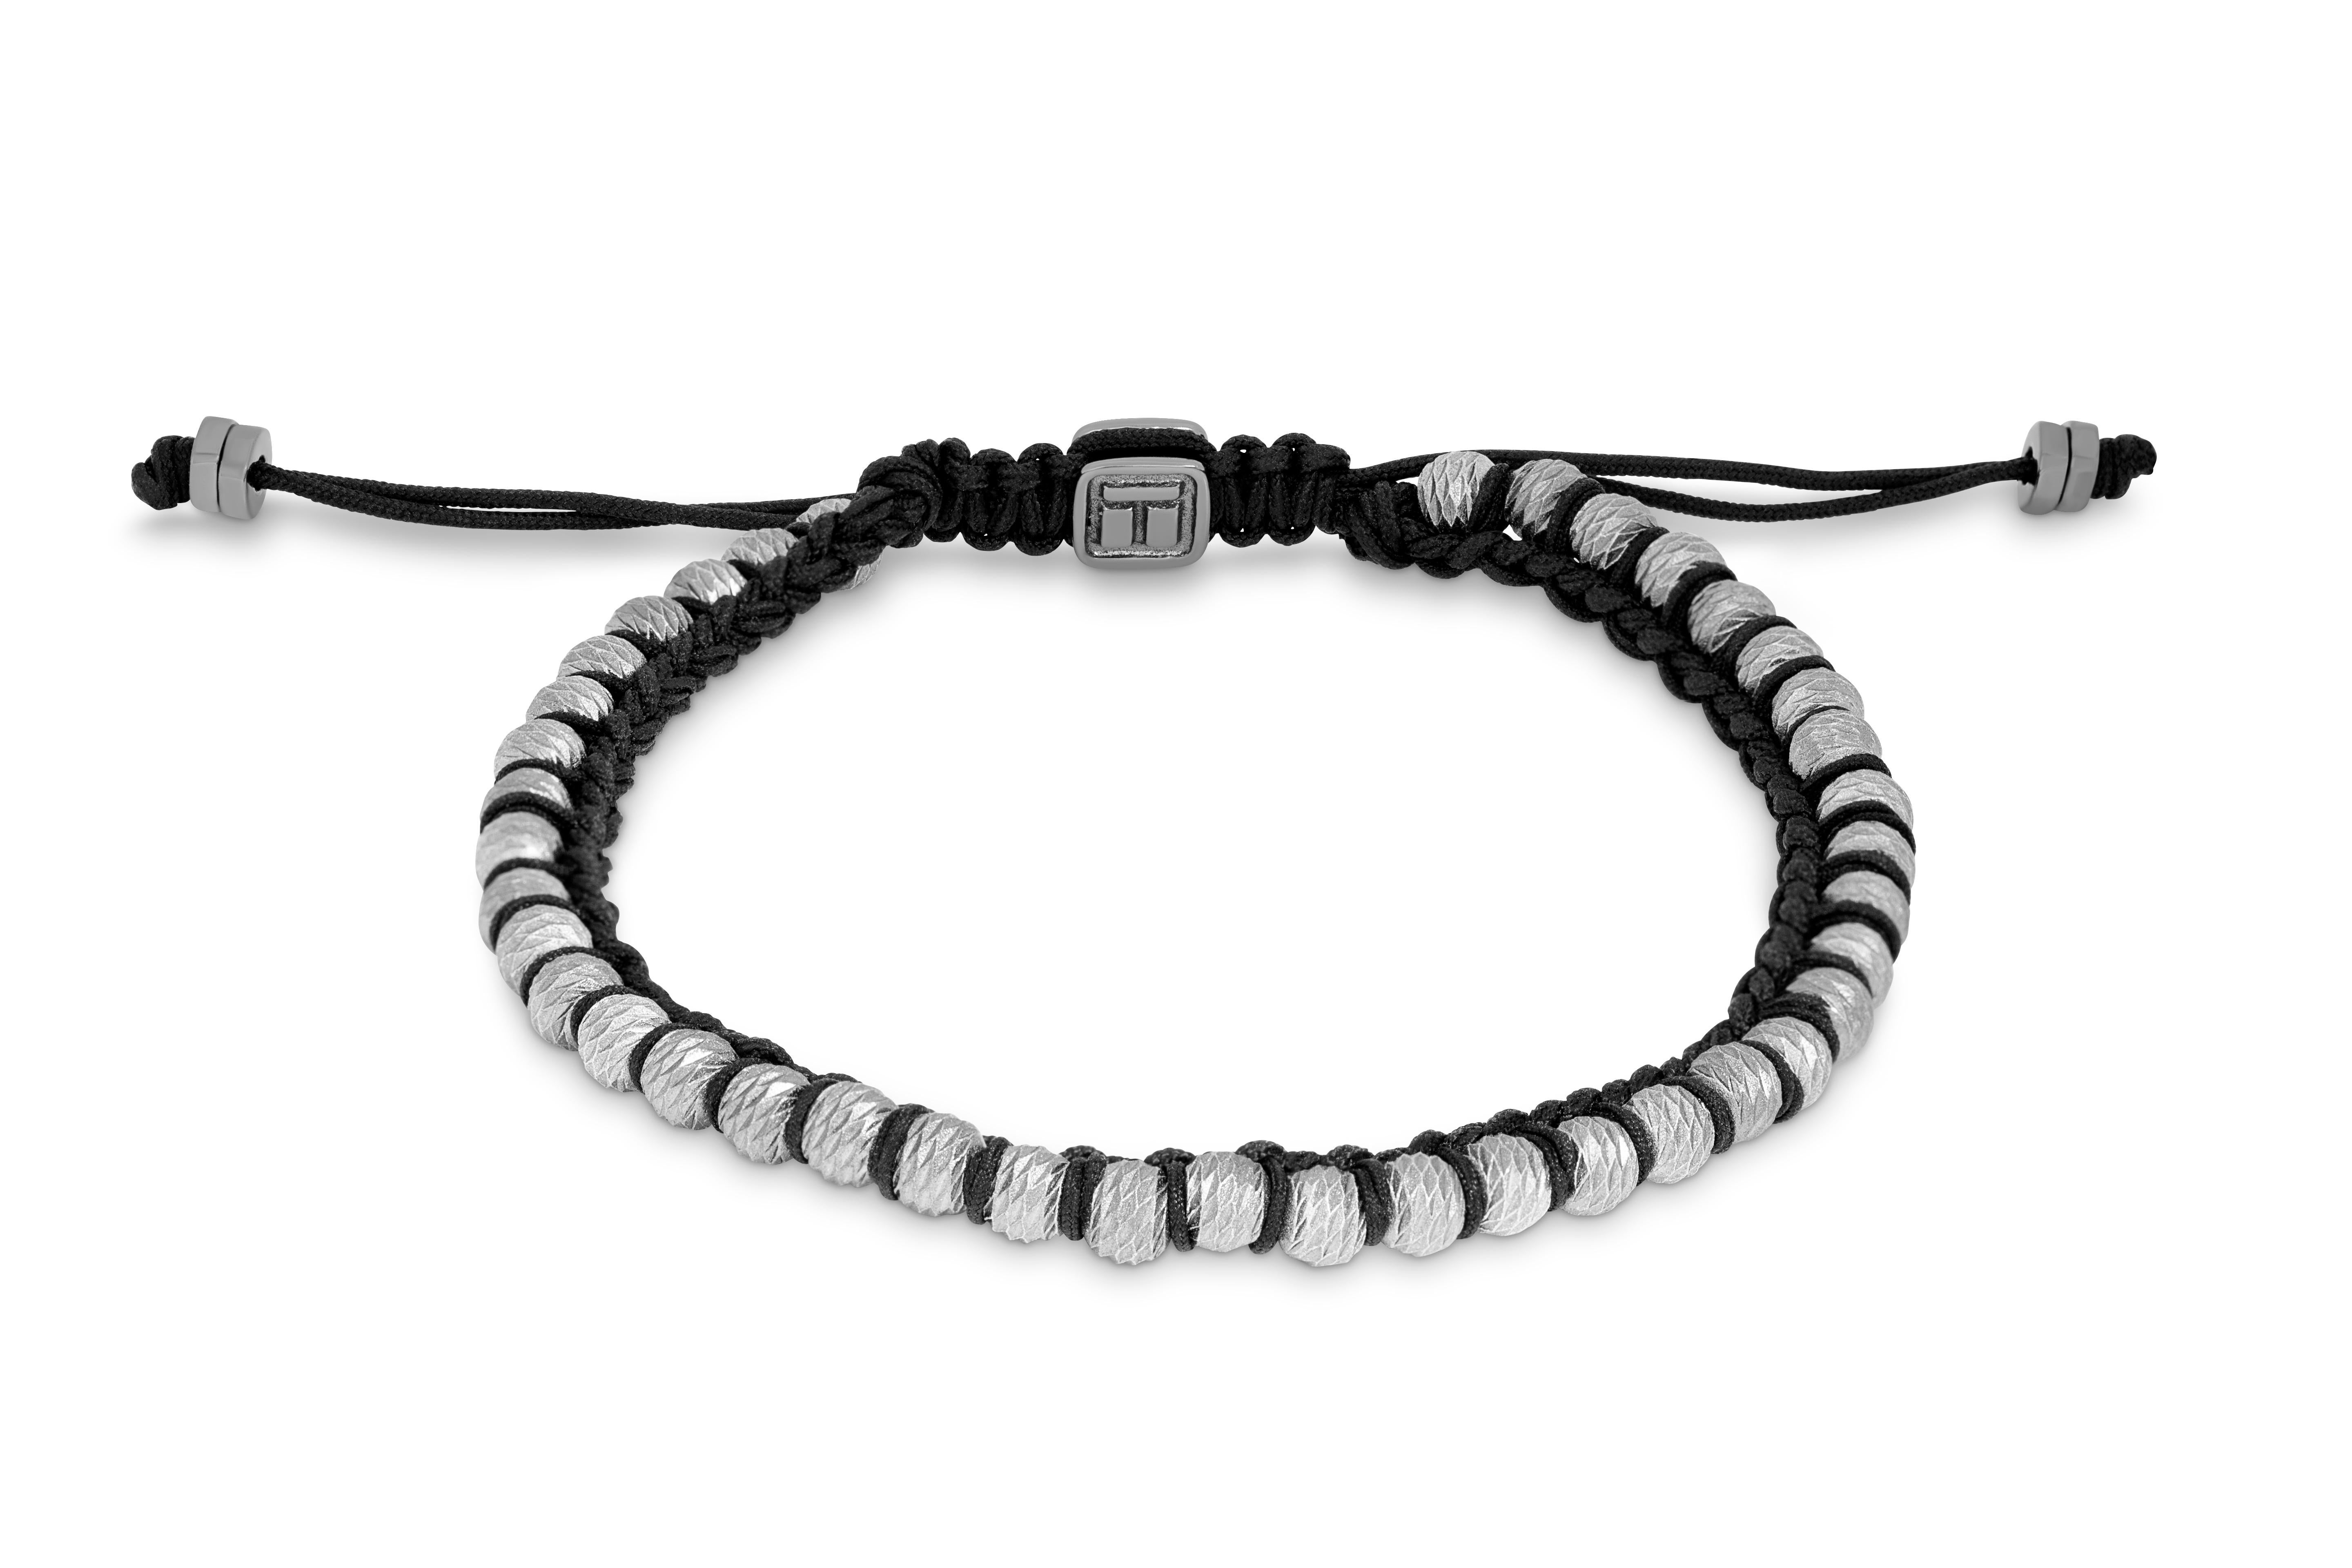 Sennit Classico Bracelet in Macrame with Rhodium-Plated Sterling Silver, Size L

This sleek and versatile macrame bracelet is made from a unique macrame braiding combined with textured round silver beads. Each bracelet takes around an hour and a